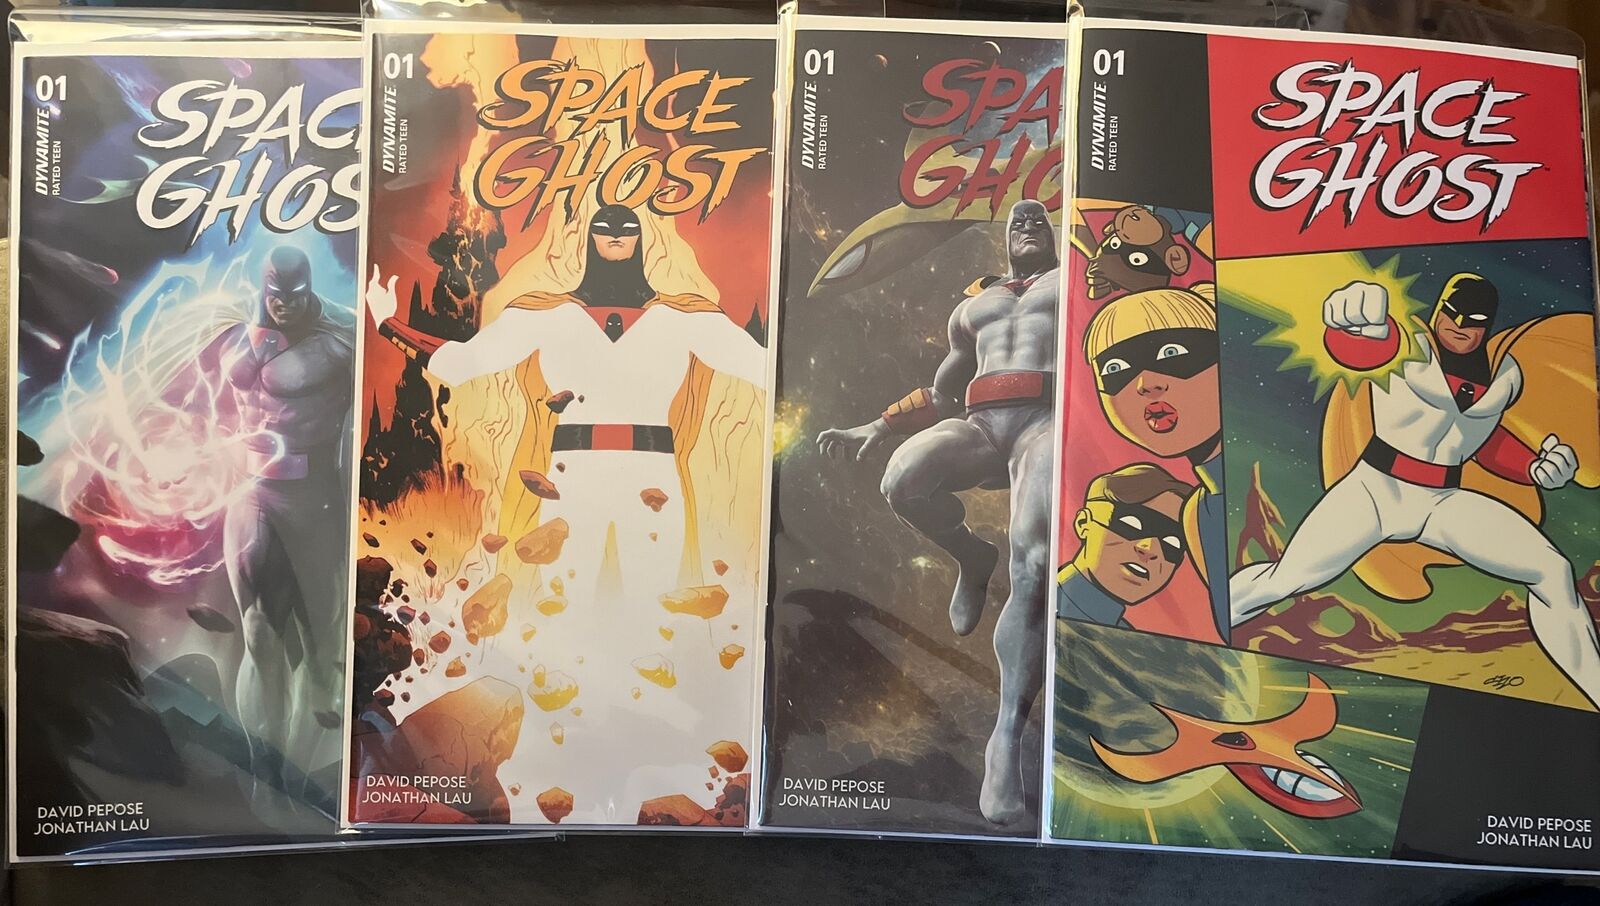 NEW [PRESALE] SPACE GHOST #1 Cover A B C D 4 Book Set NM PREMIER ISSUE